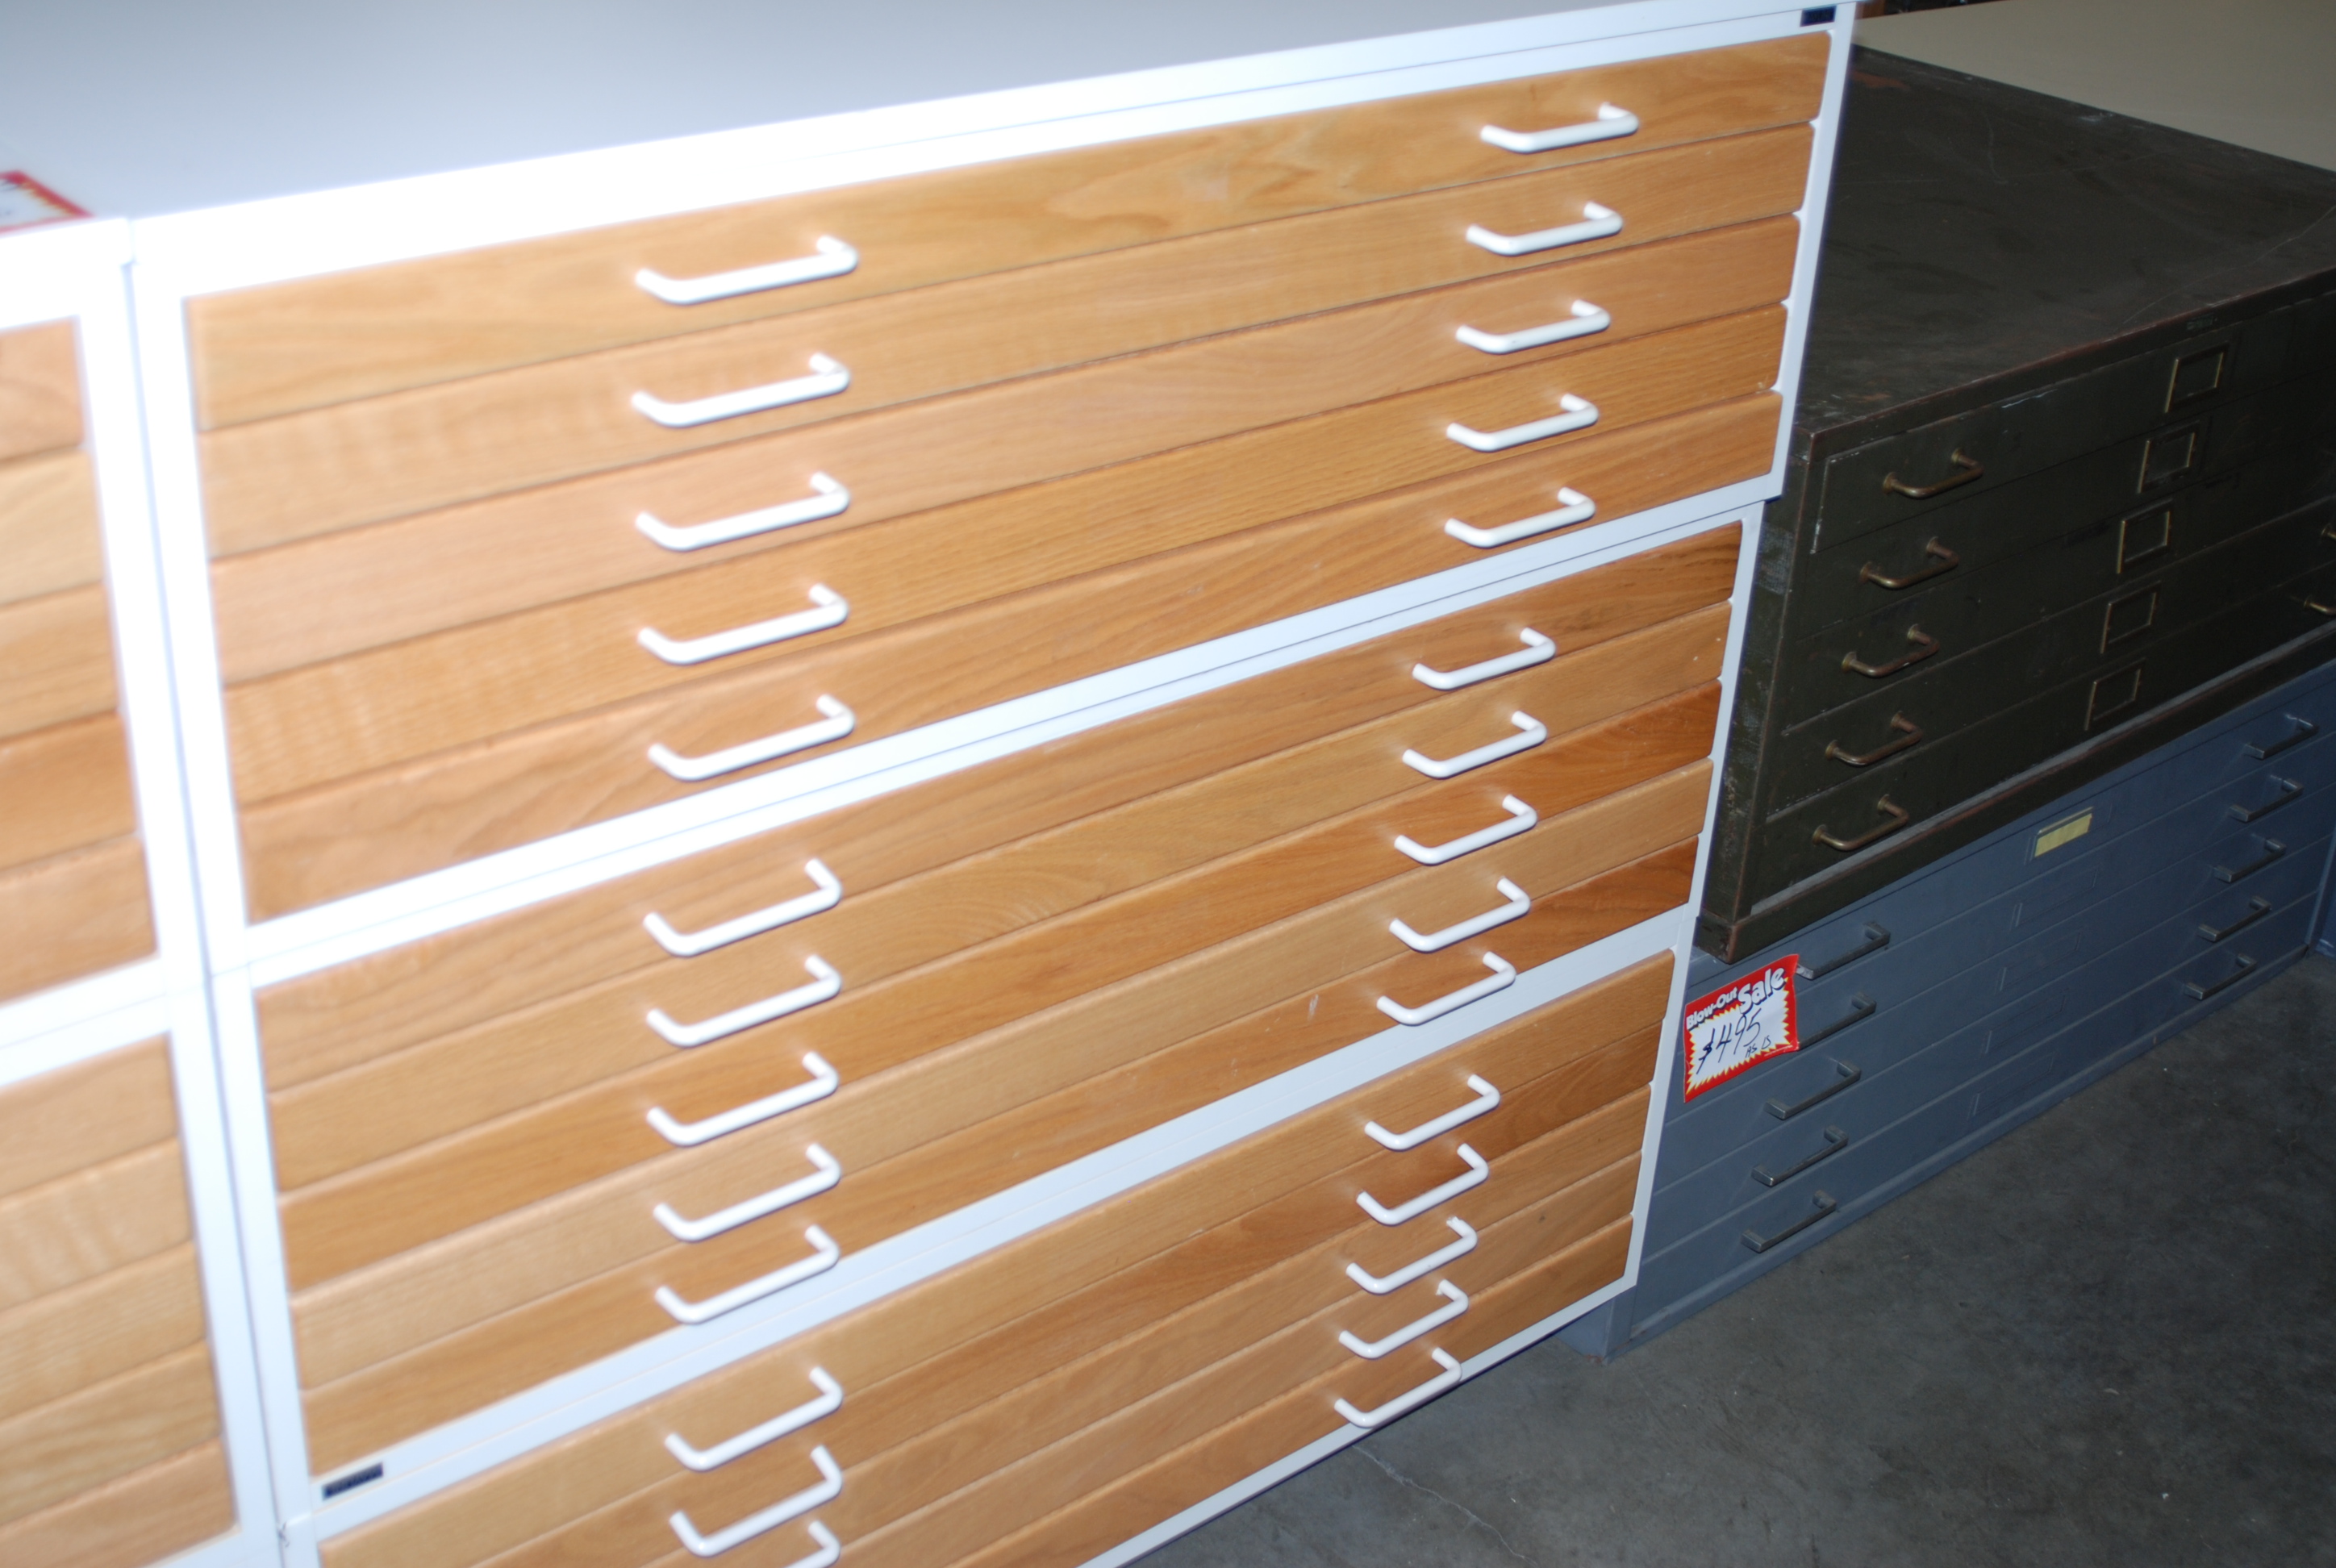 Used Flat Files Roll Plan, Used Architect File Cabinets